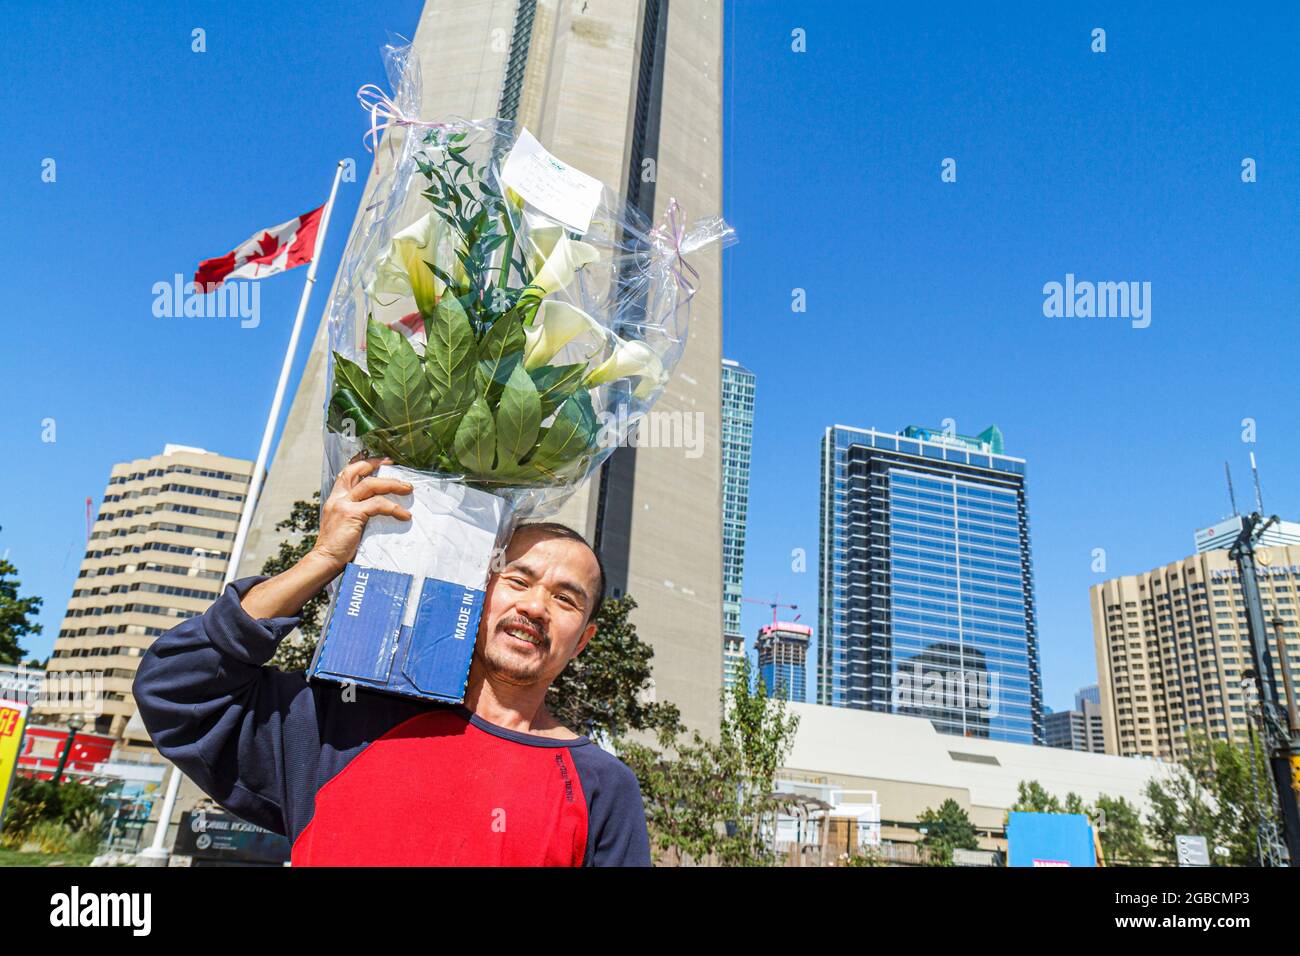 Toronto Canada,Bremner Boulevard CN Tower,observation skyline Canadian Asian man carrying flowers delivery delivering, Stock Photo